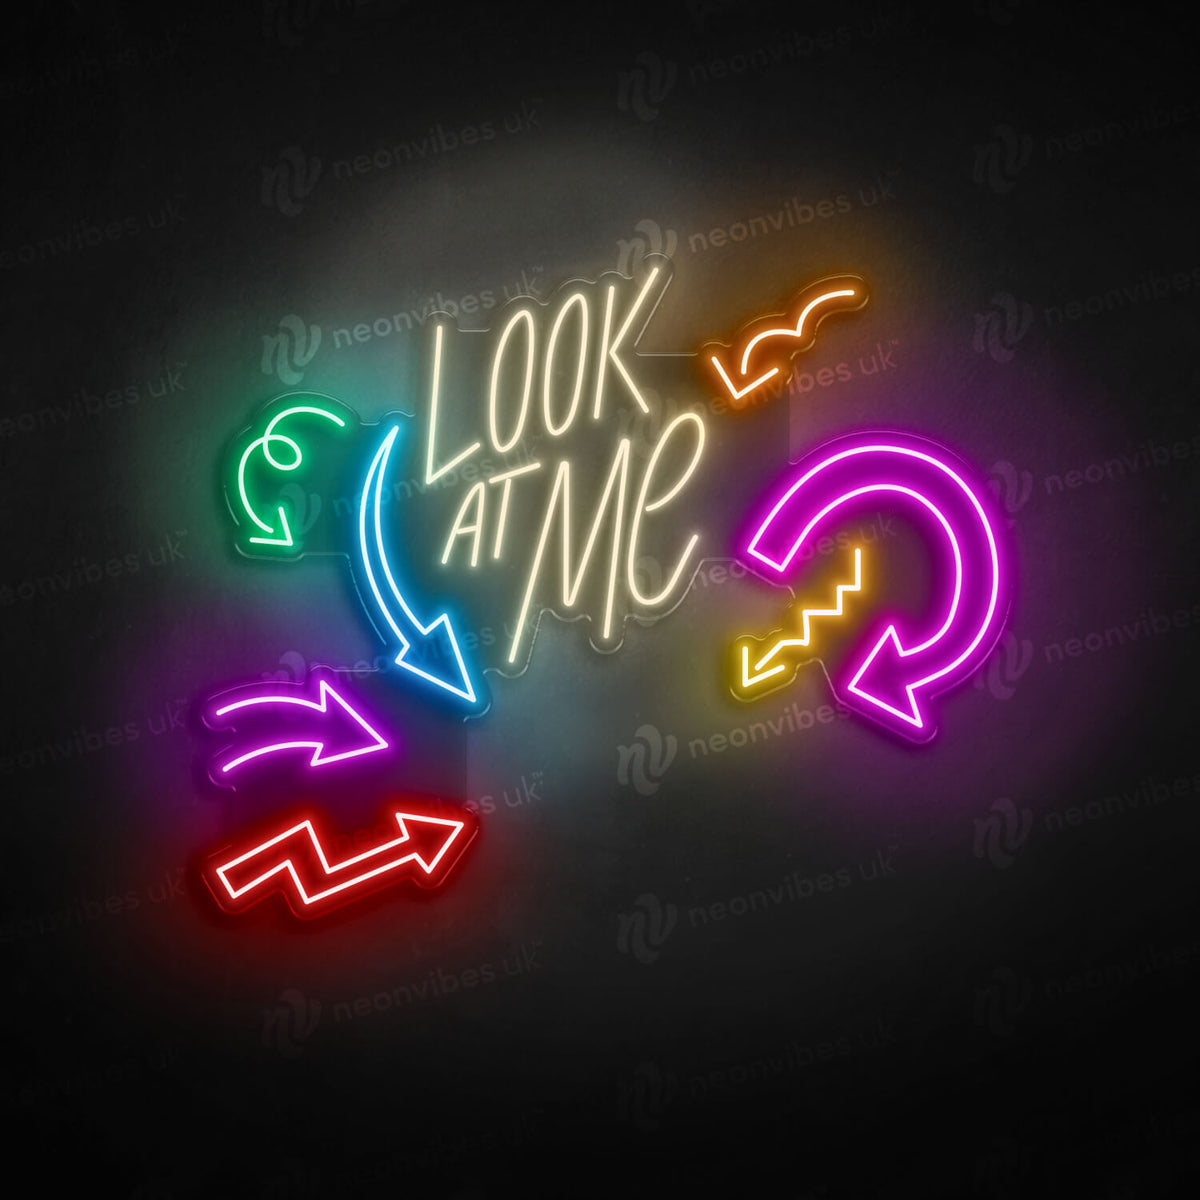 Look at me neon sign